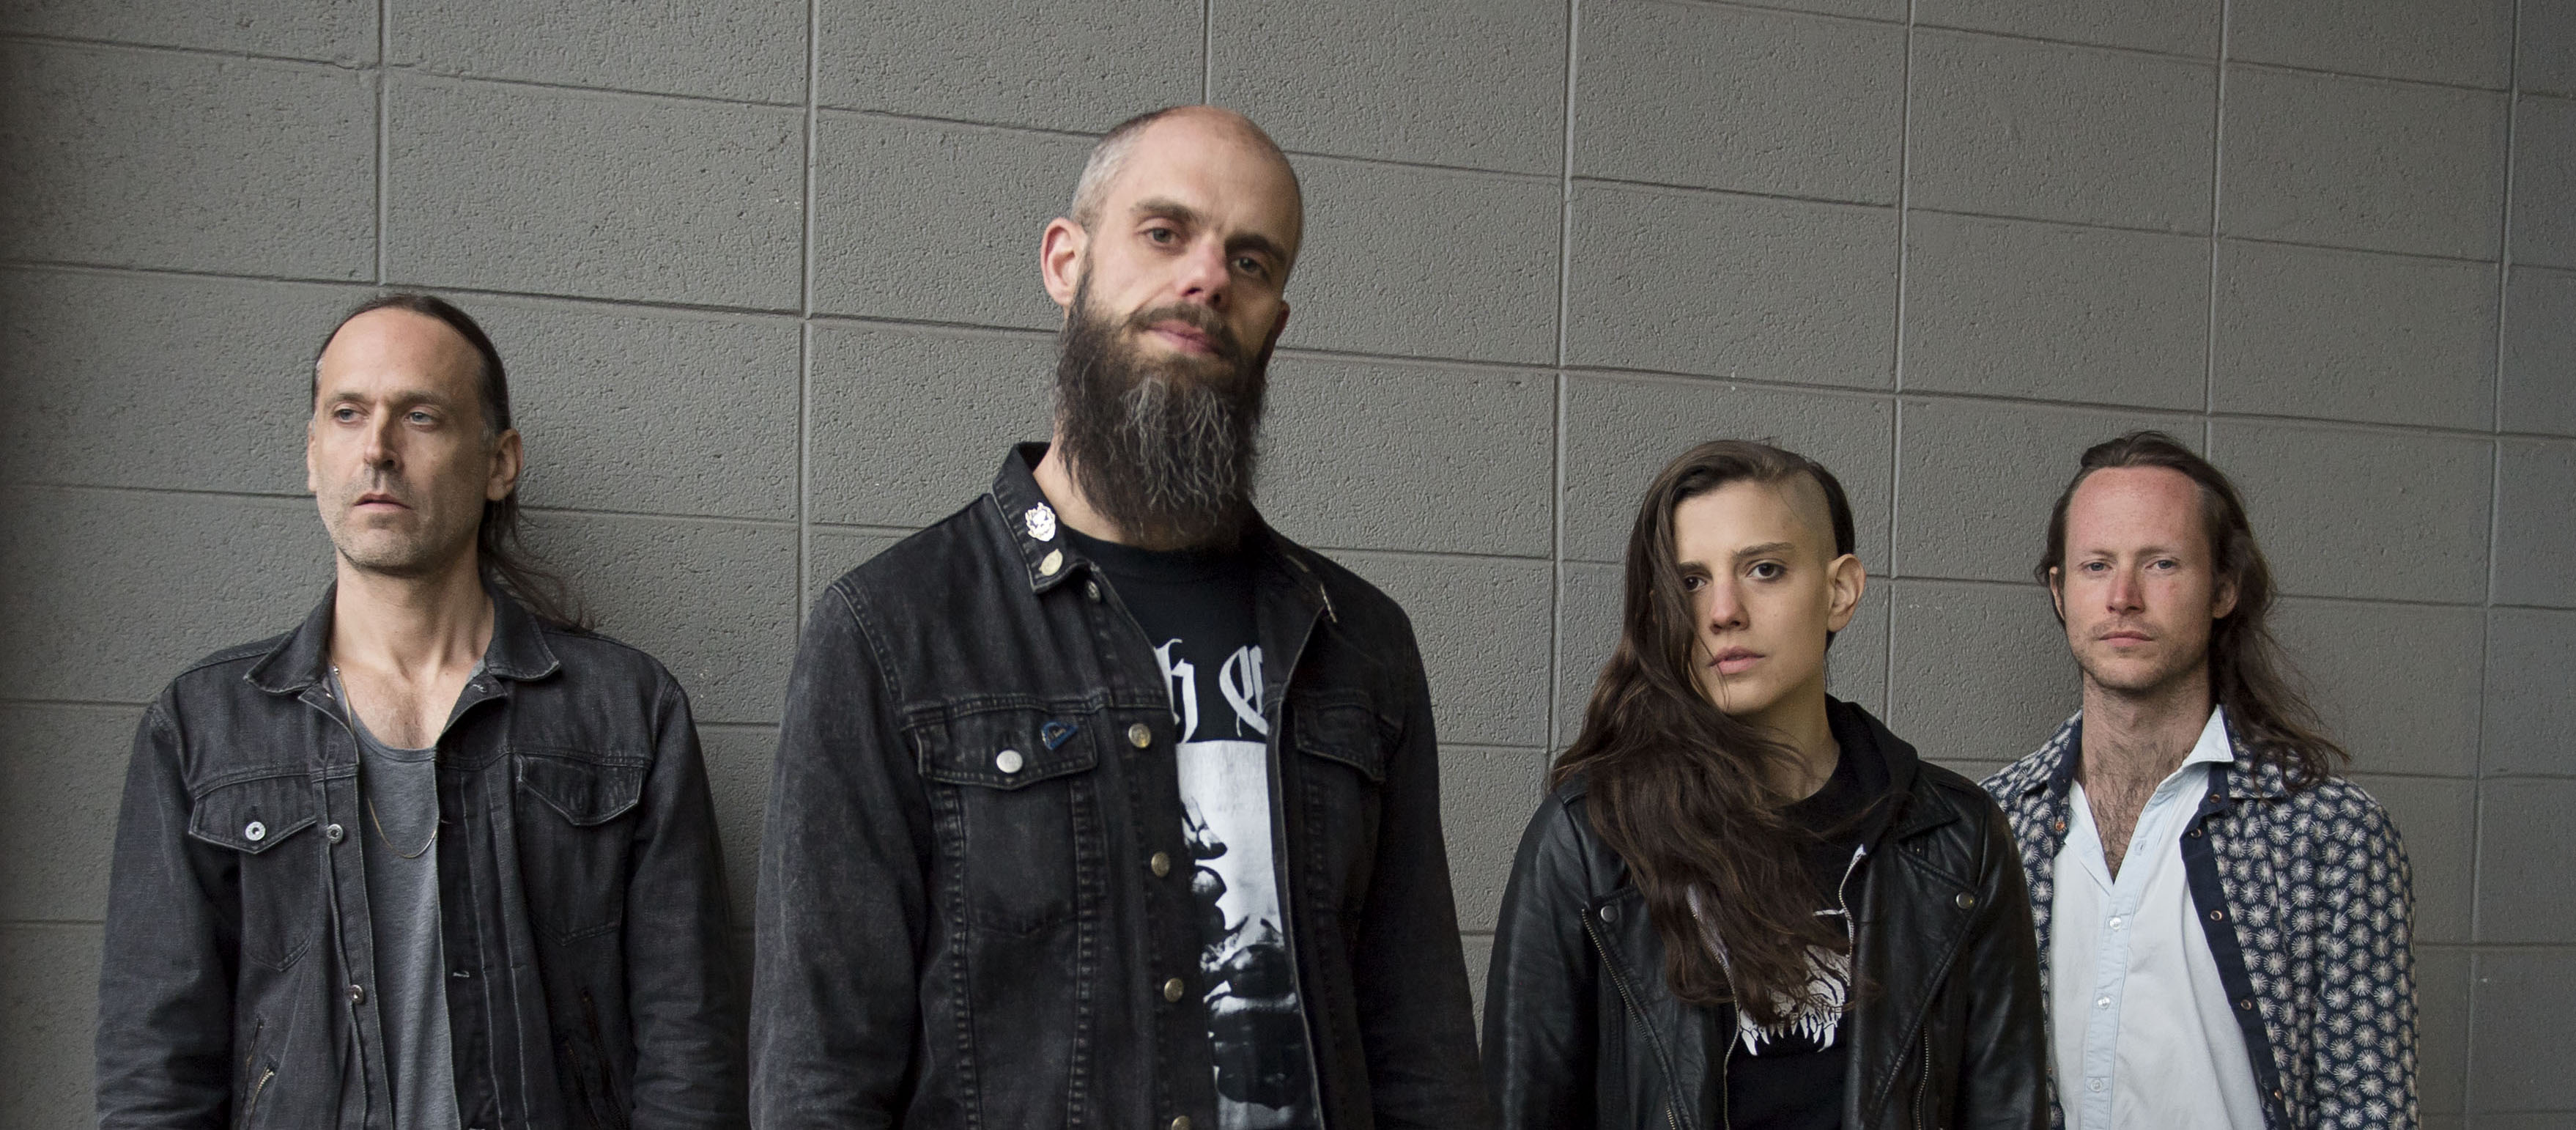 Baroness officially reveal artwork for new album ‘Gold & Grey’